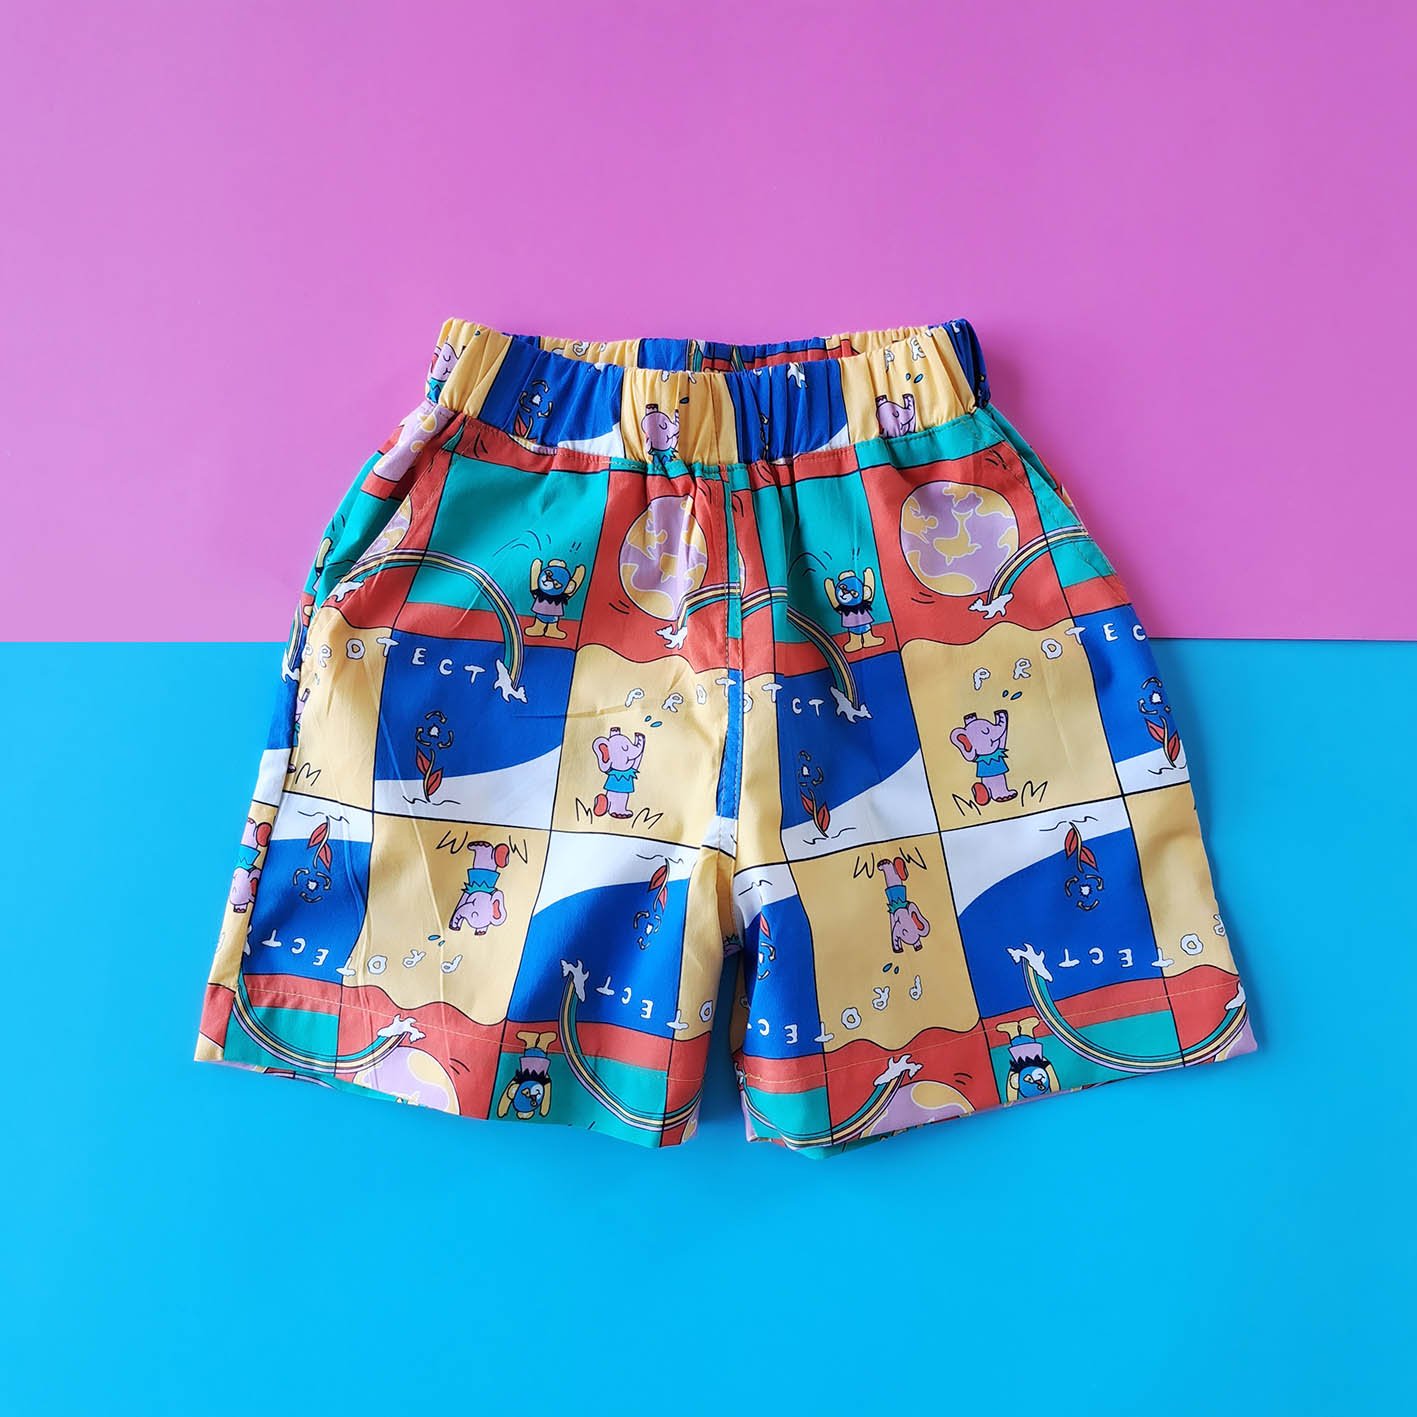 BOYS & GIRLS ELASTIC WAISTBAND PROTECT OUR WORLD SHORTS / 100% PRINTED COTTON*PRE-ORDER SHIP OUT 3 MARCH